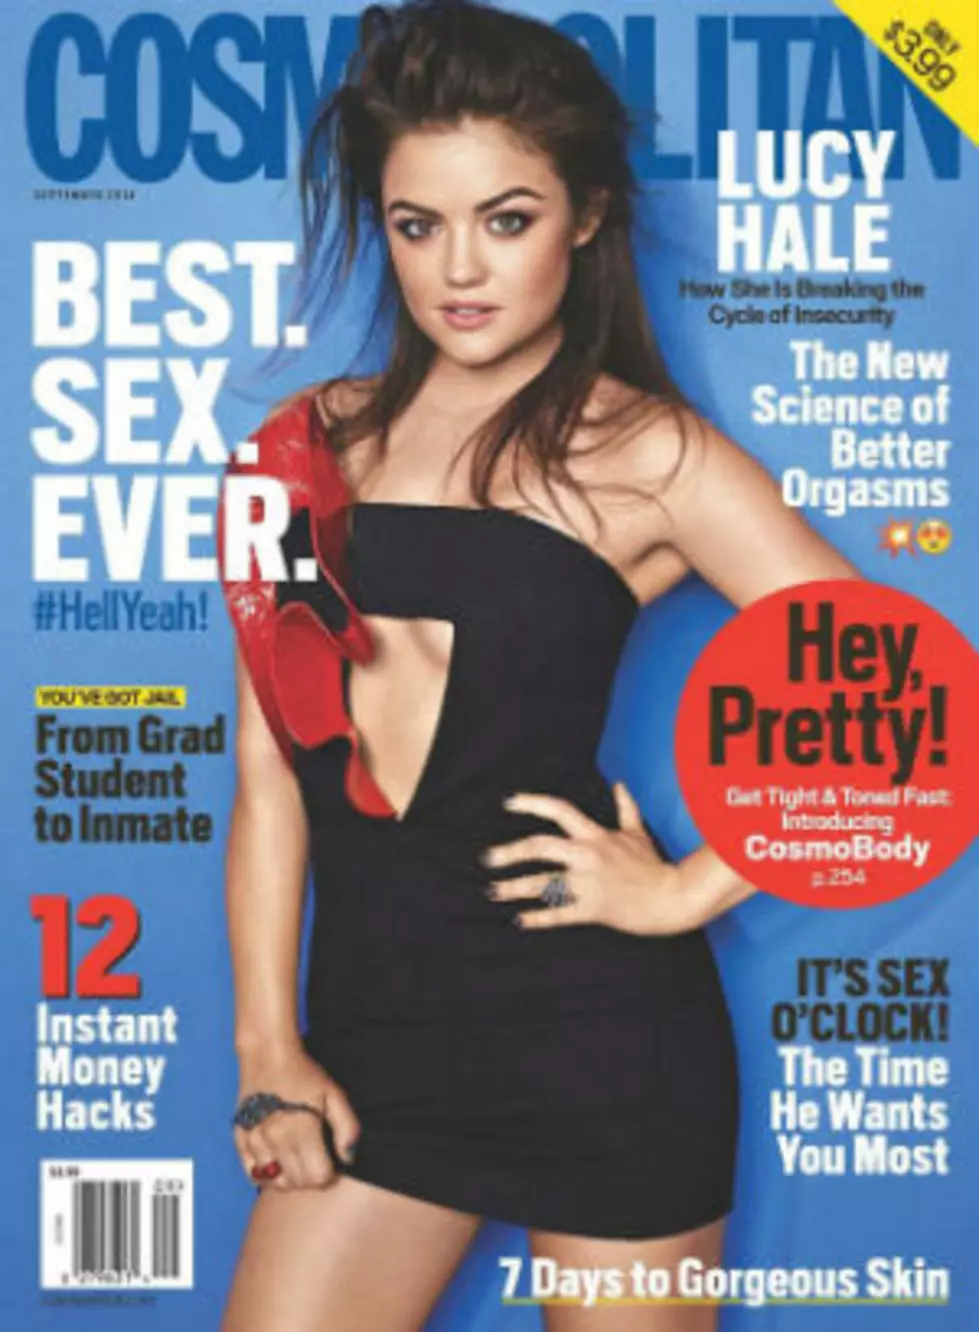 Lucy Hale on Cover of Cosmopolitan